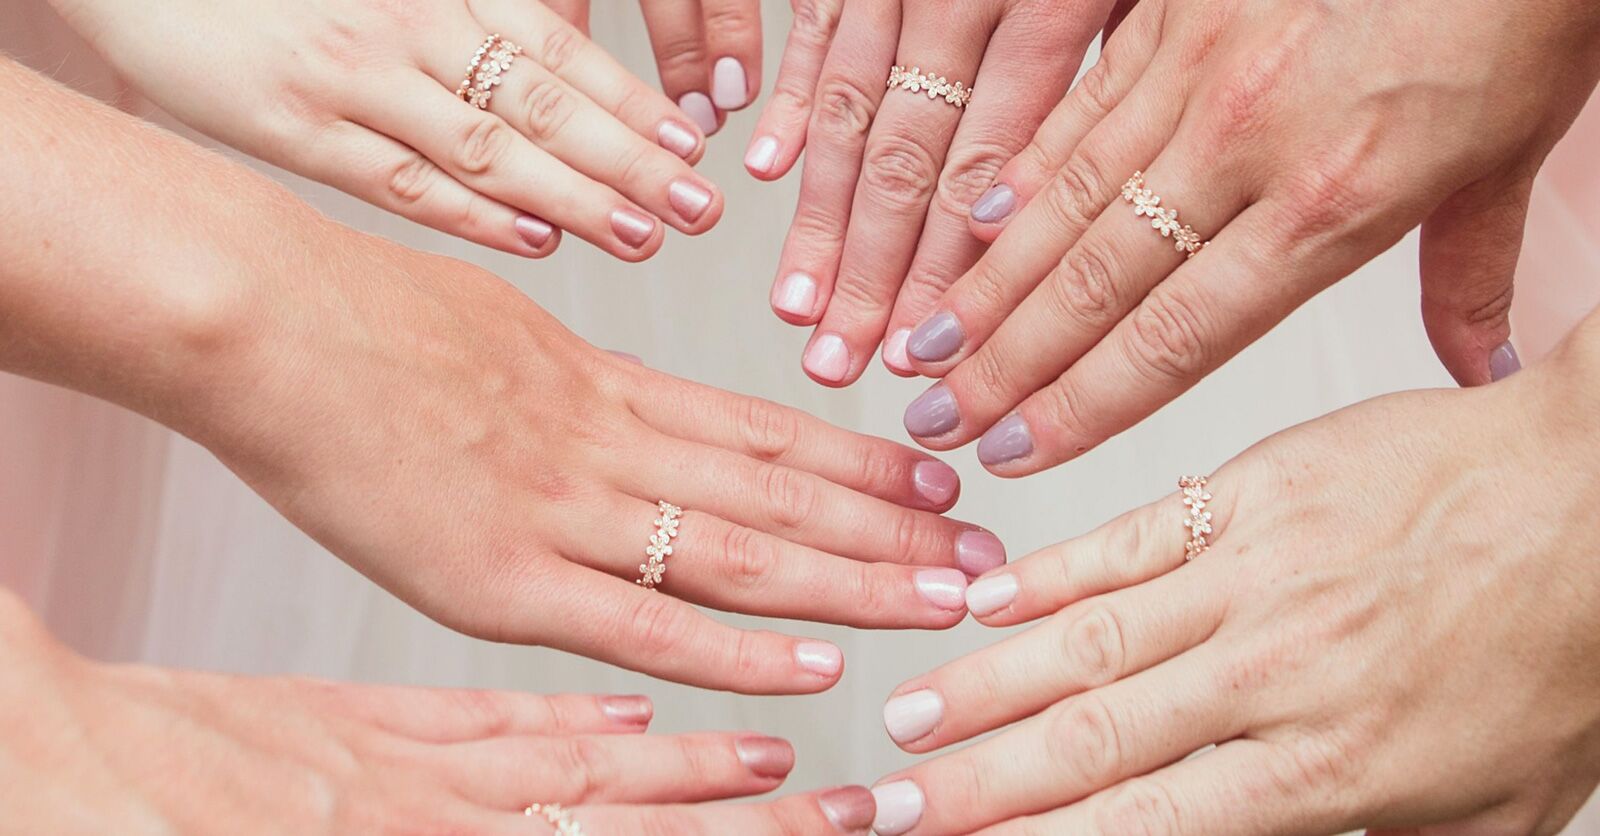 1. "Bridesmaid Nail Designs: 25 Ideas for Your Bridal Party" - wide 6